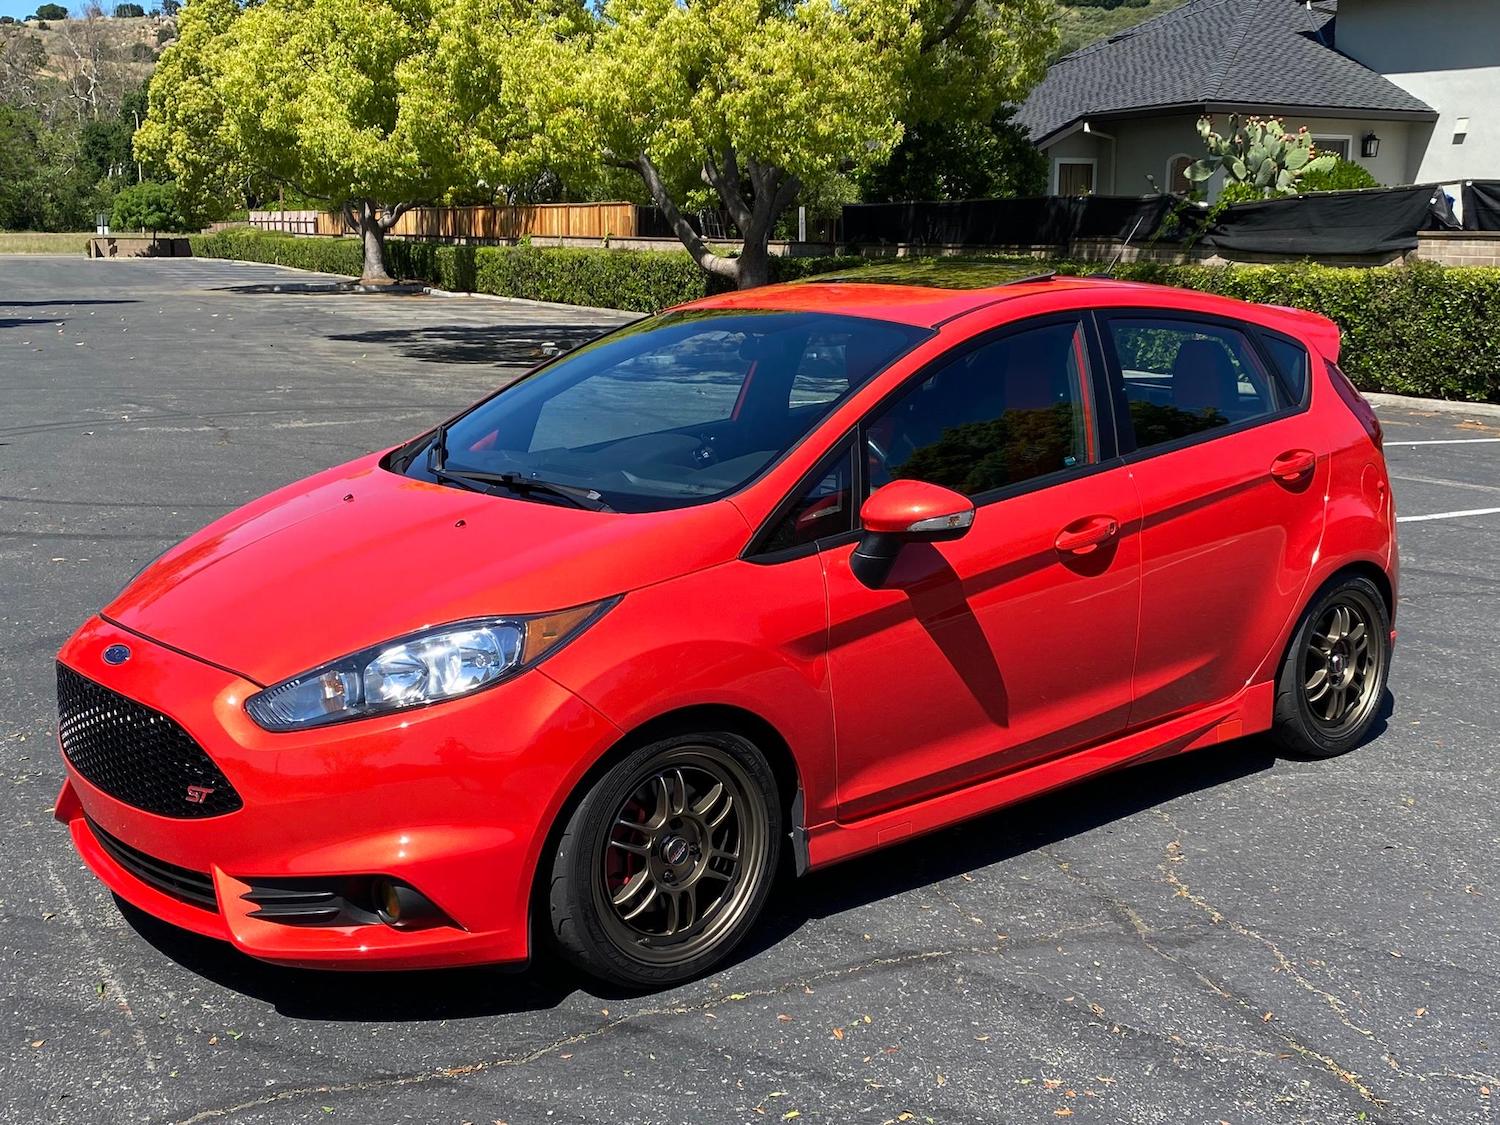 Extensively Modified 2016 Ford Fiesta ST Up For Auction